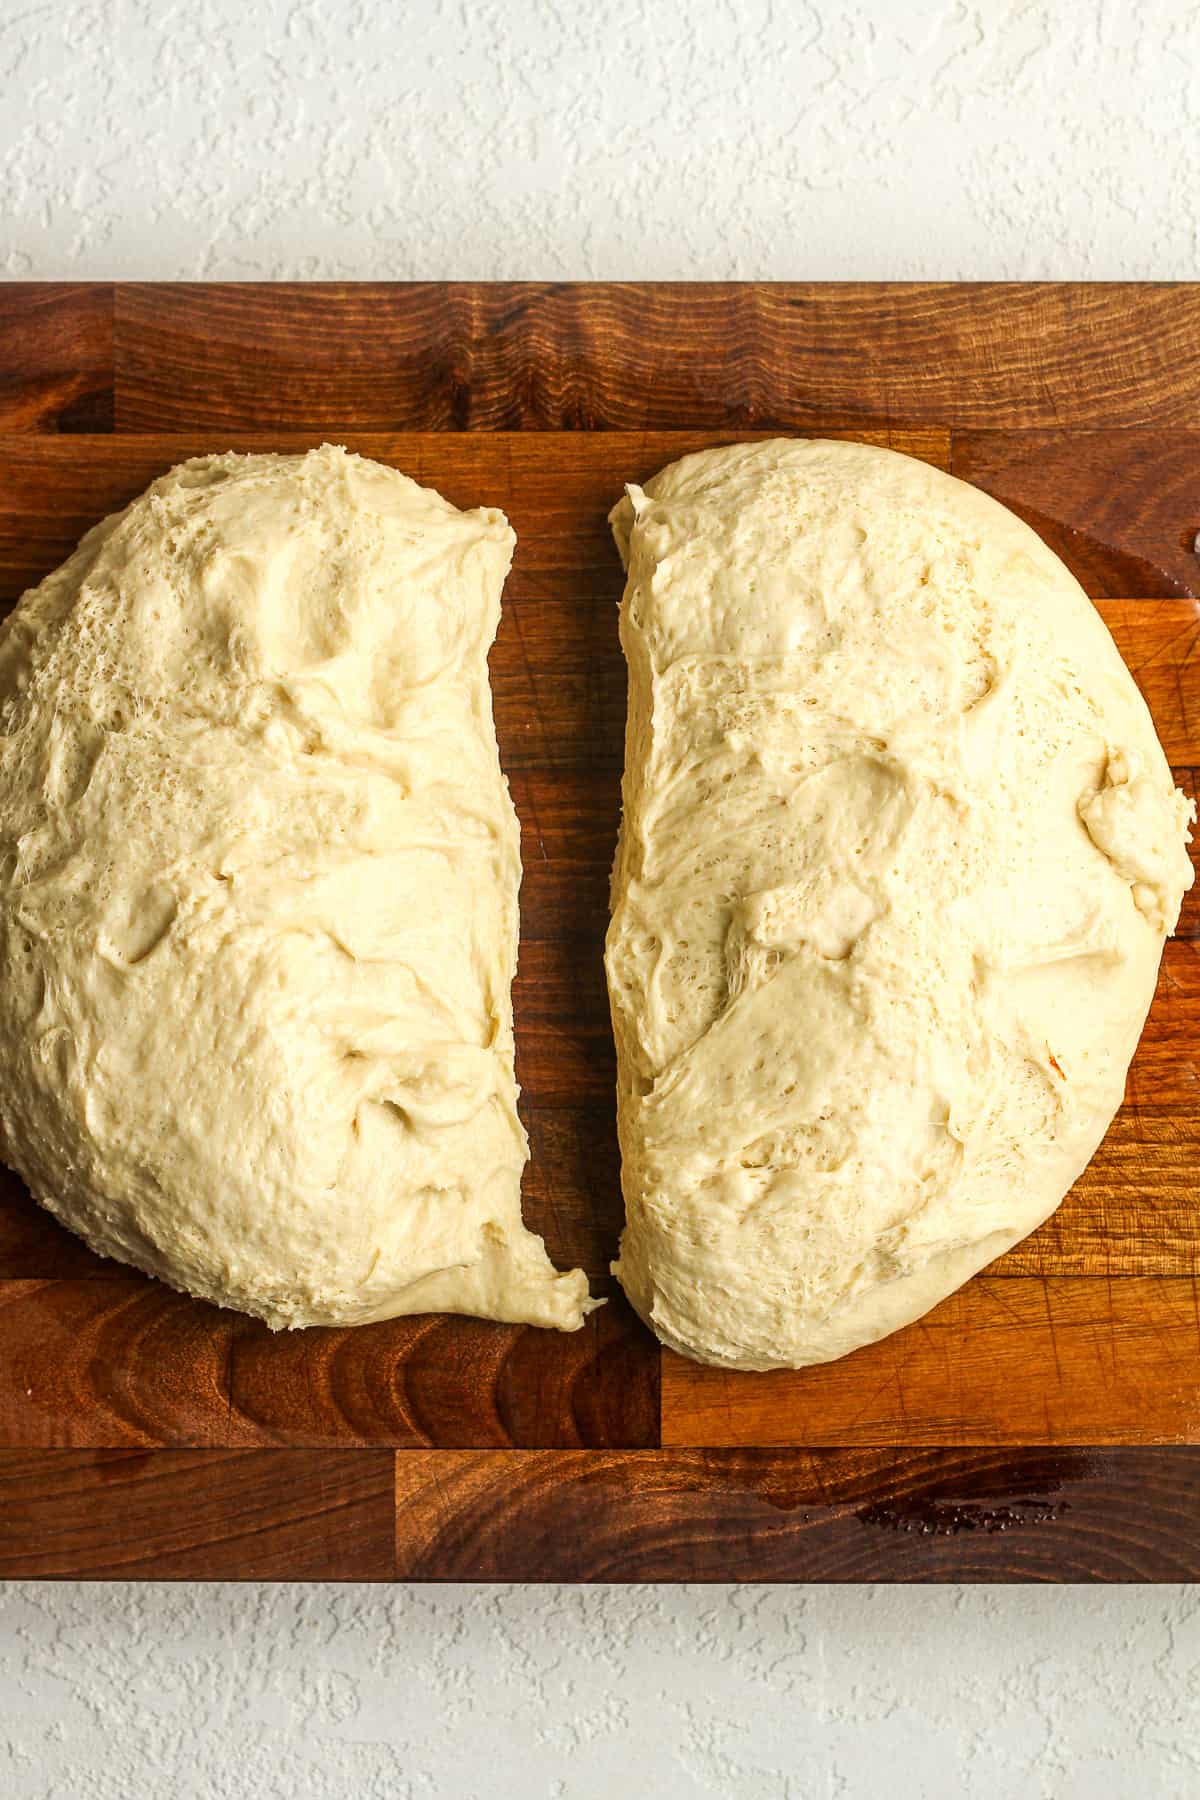 The bread dough divided in half.